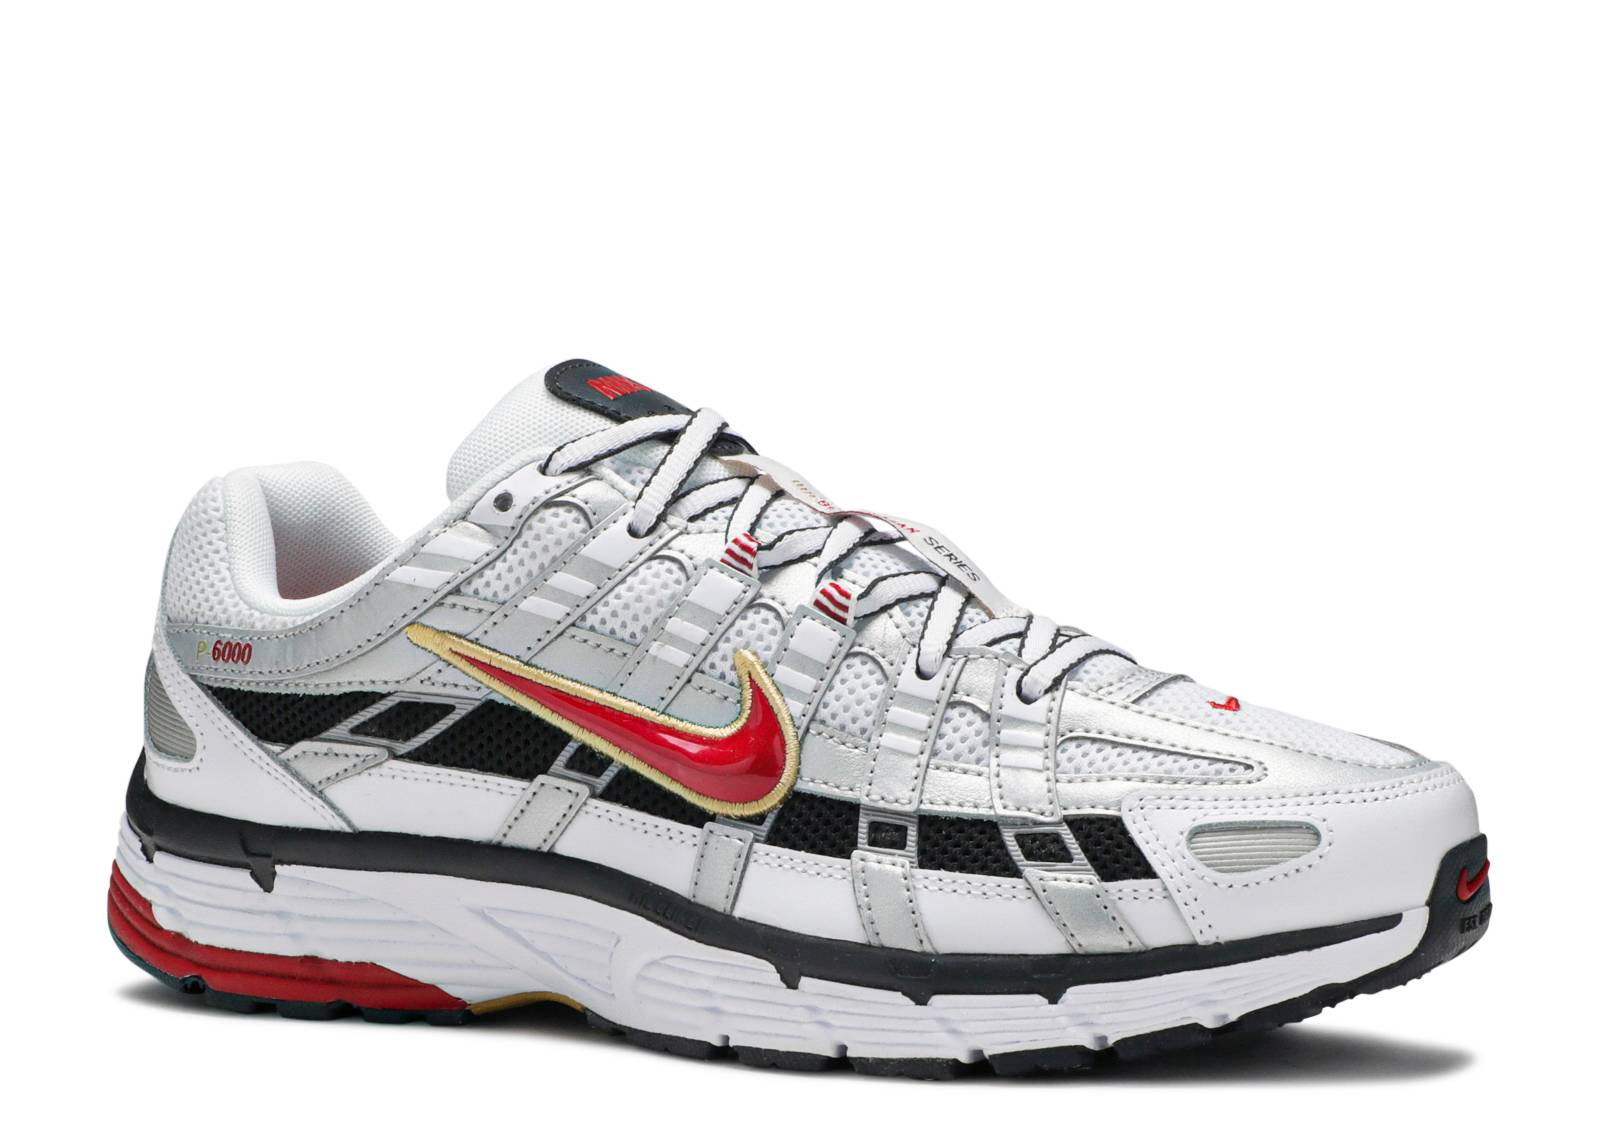 nike p6000 red silver